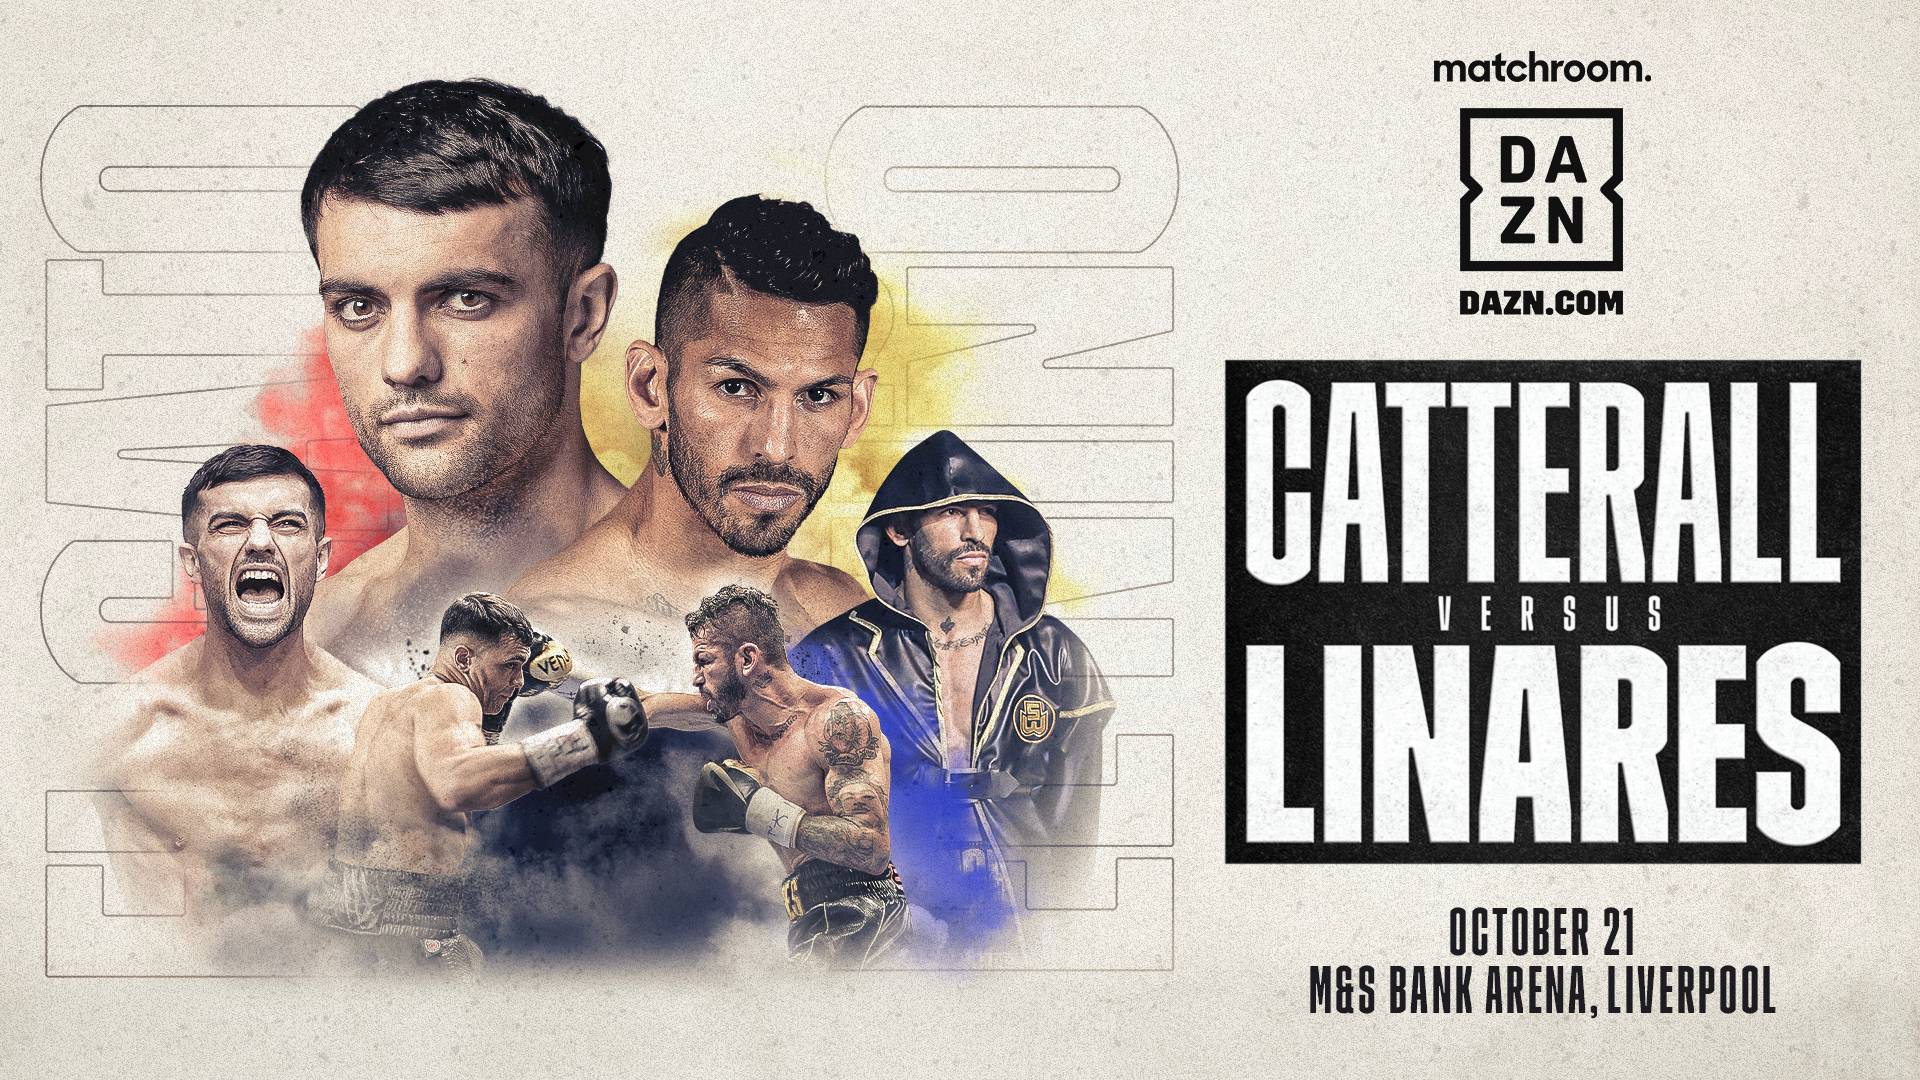 Catterall vs. Linares: Live Stream, Betting Odds & Fight Card